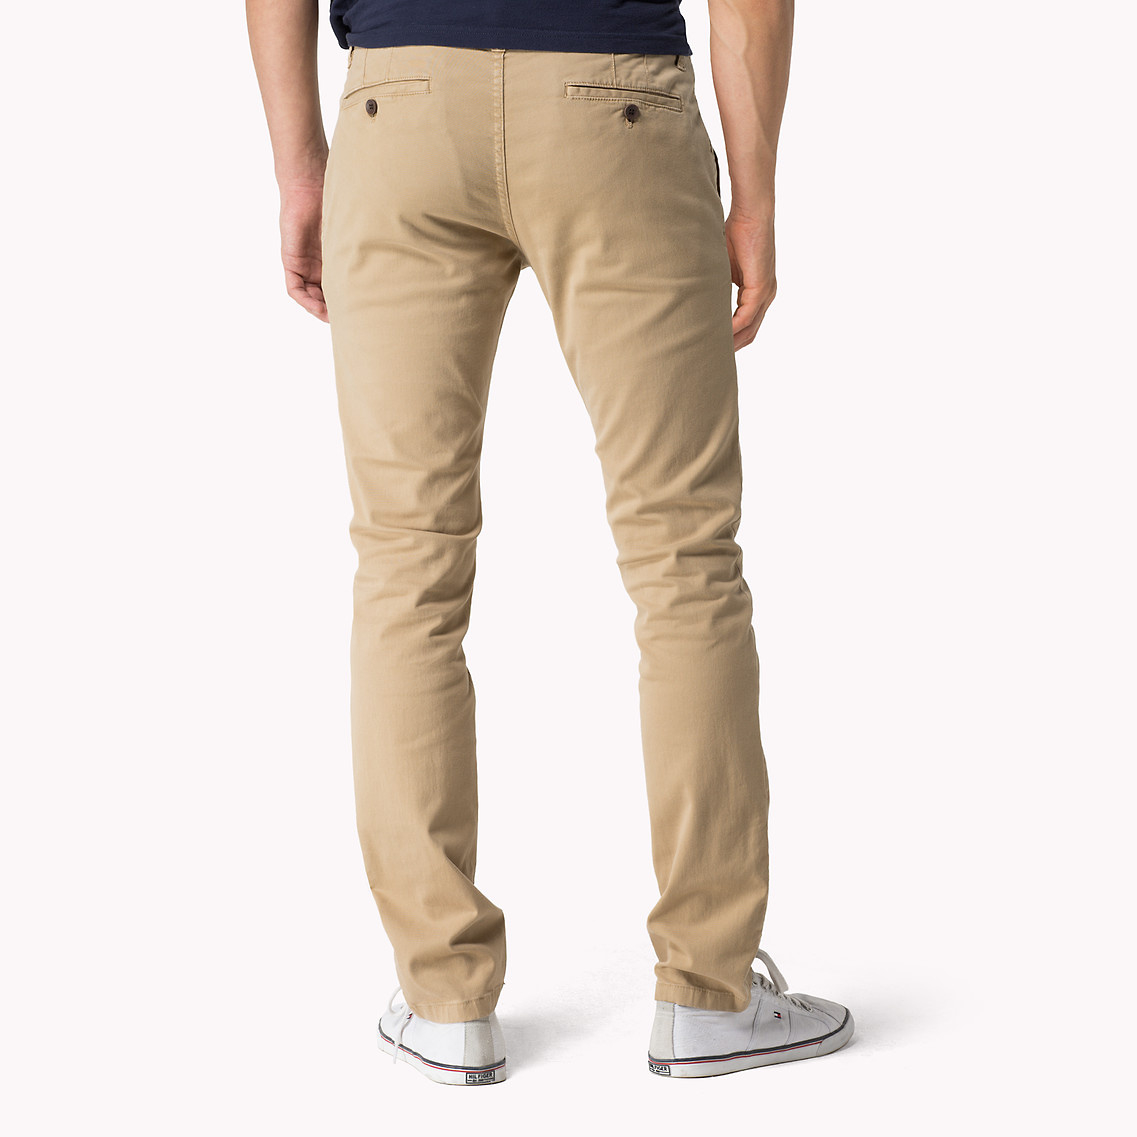 Tommy Hilfiger Ferry Slim Fit Pant in 